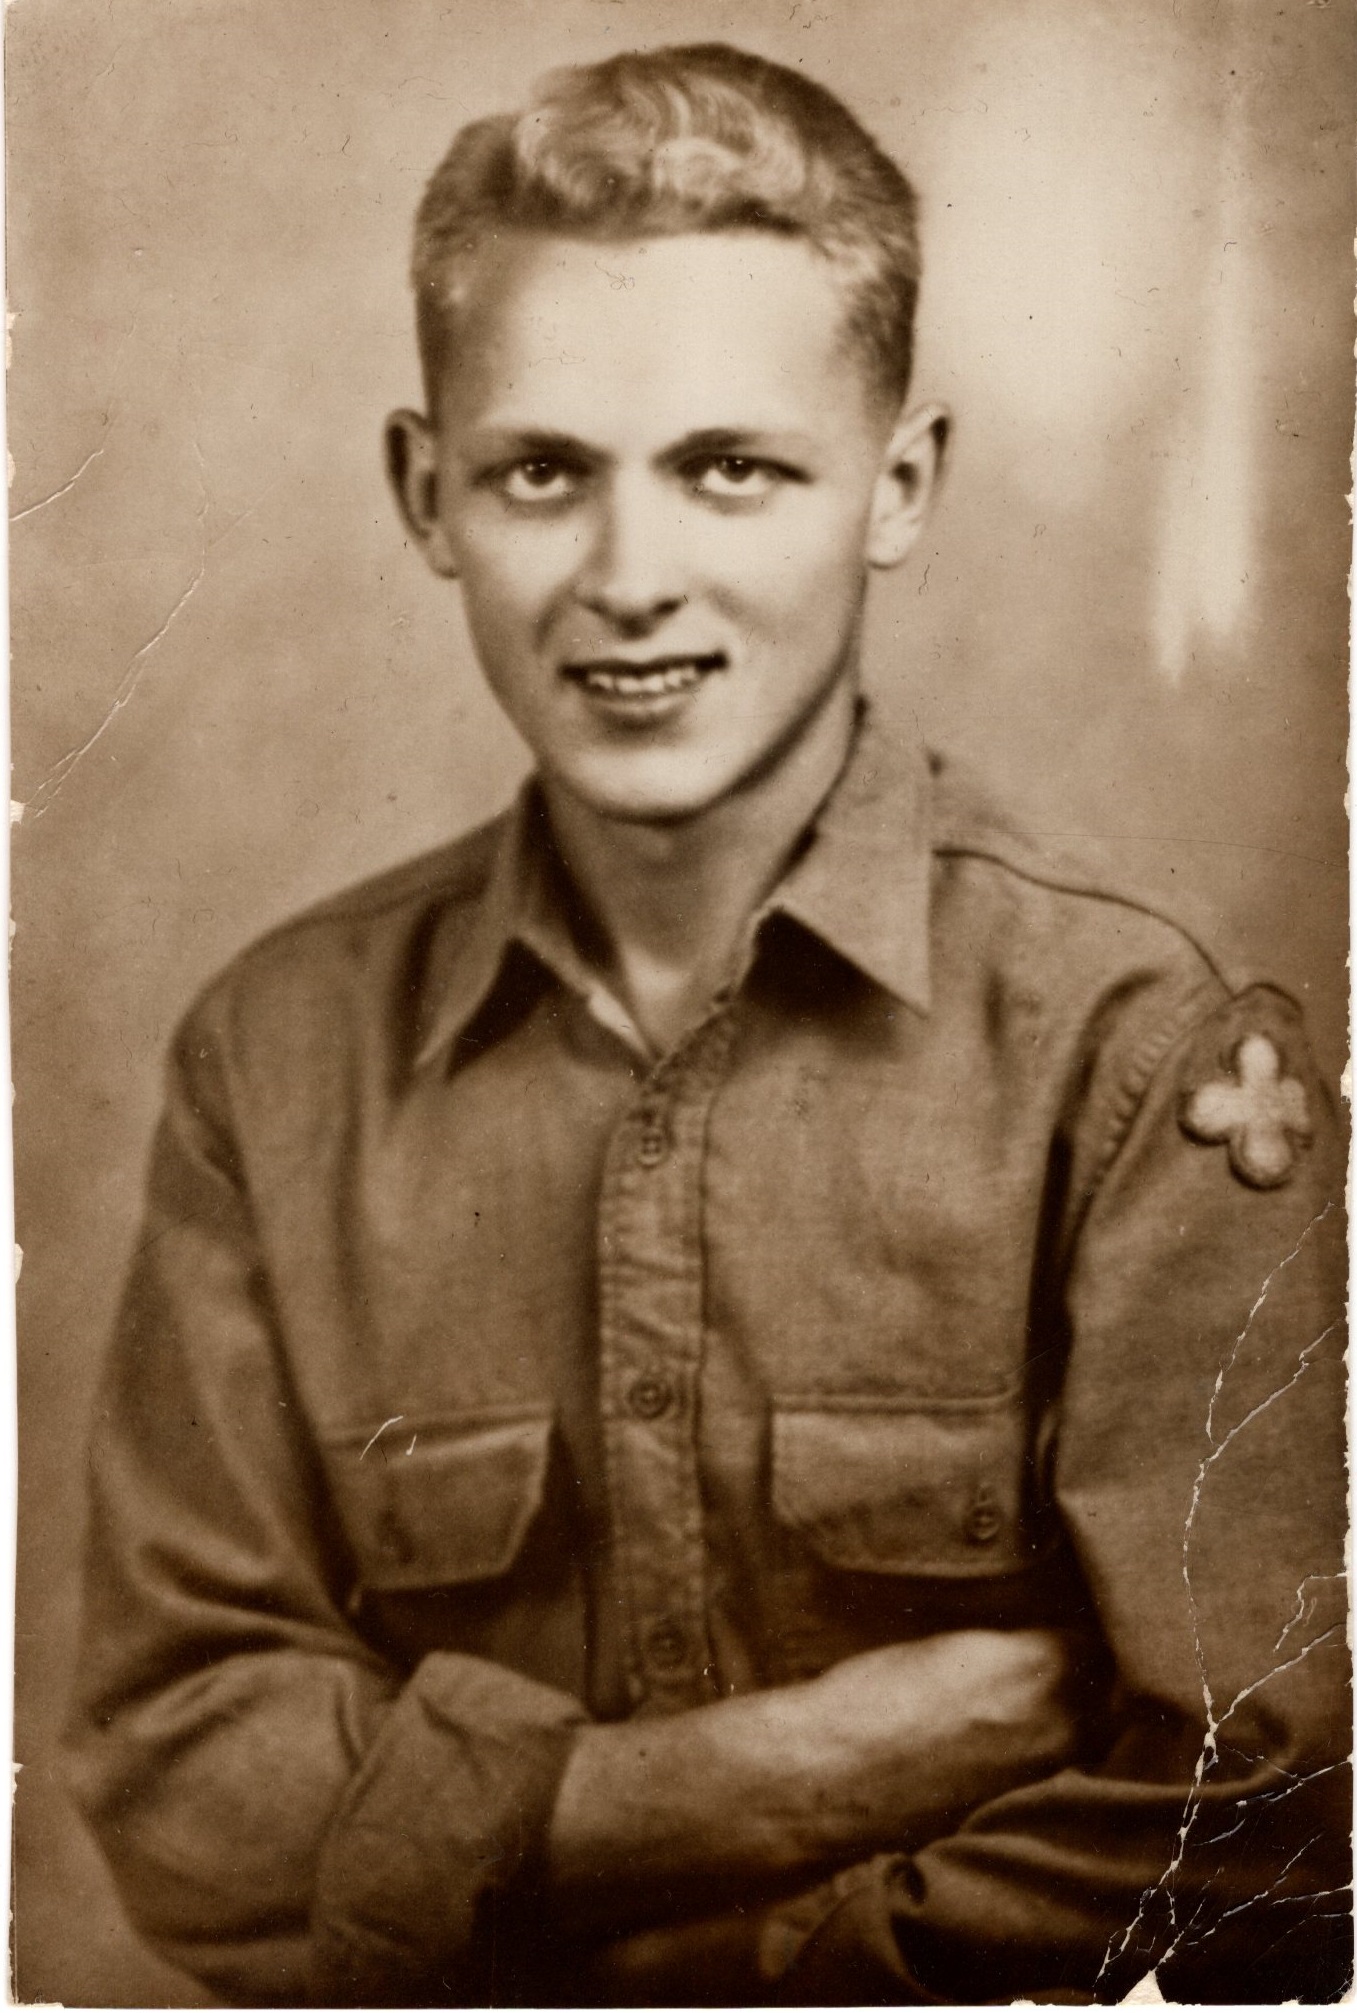 Rediscovering PFC Robert Gaulke–A Personal Journey Through History